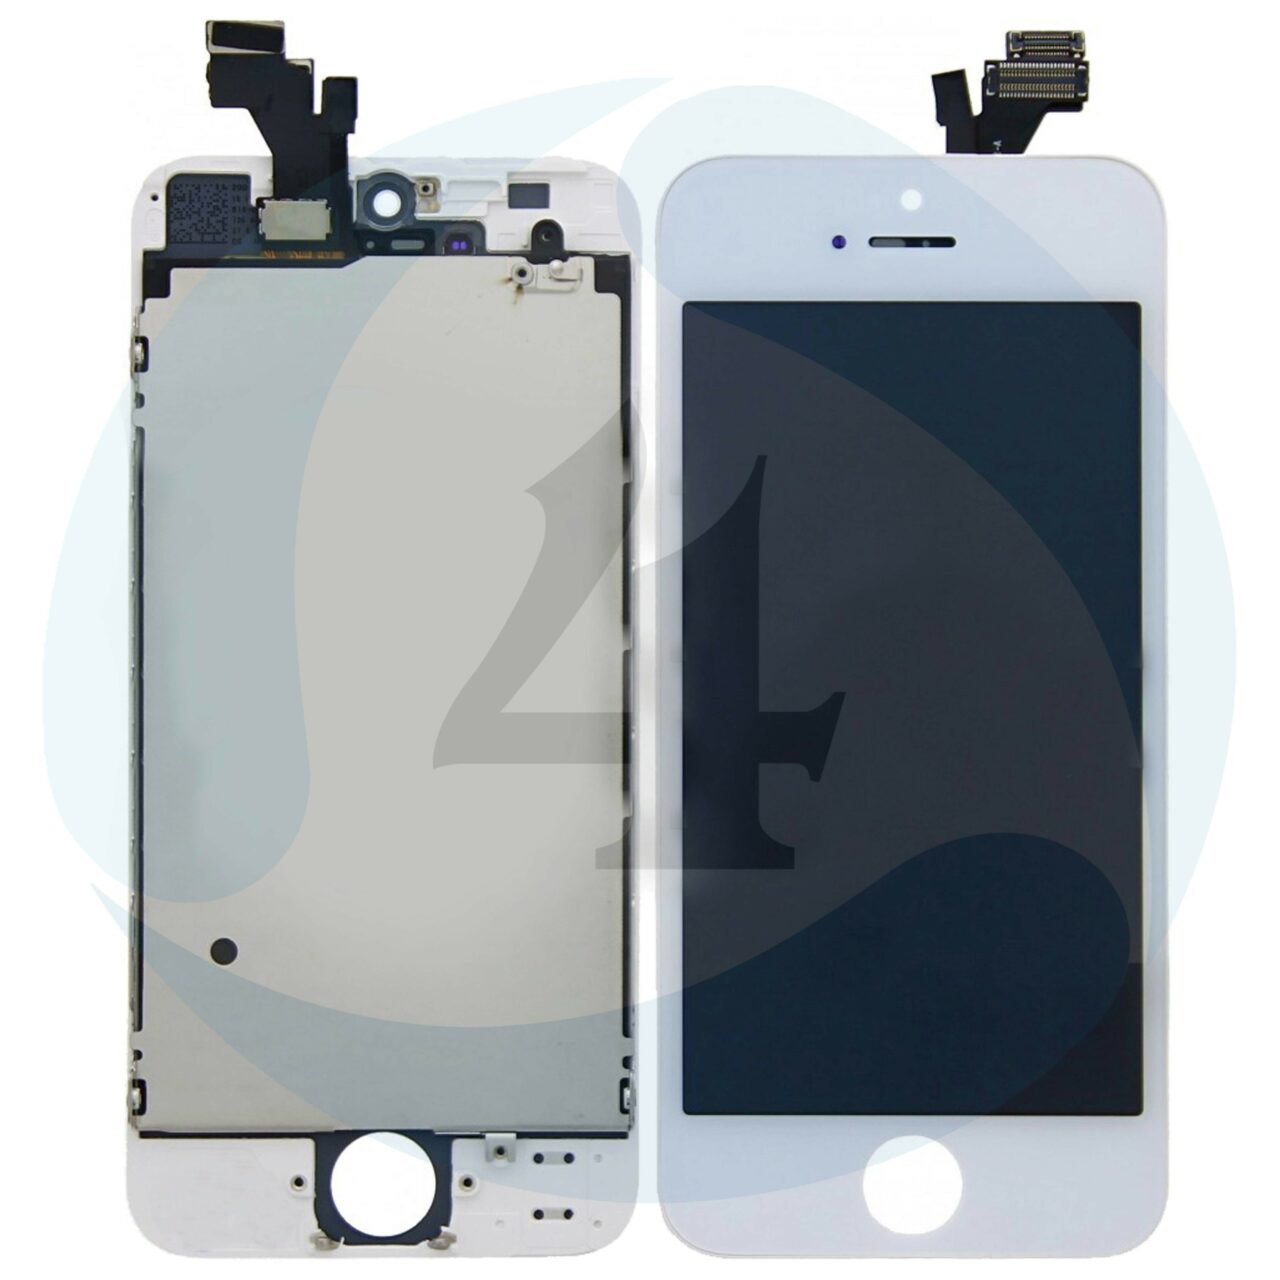 Iphone 5 display touchscreen metal plate a high quality white 1000x1000h